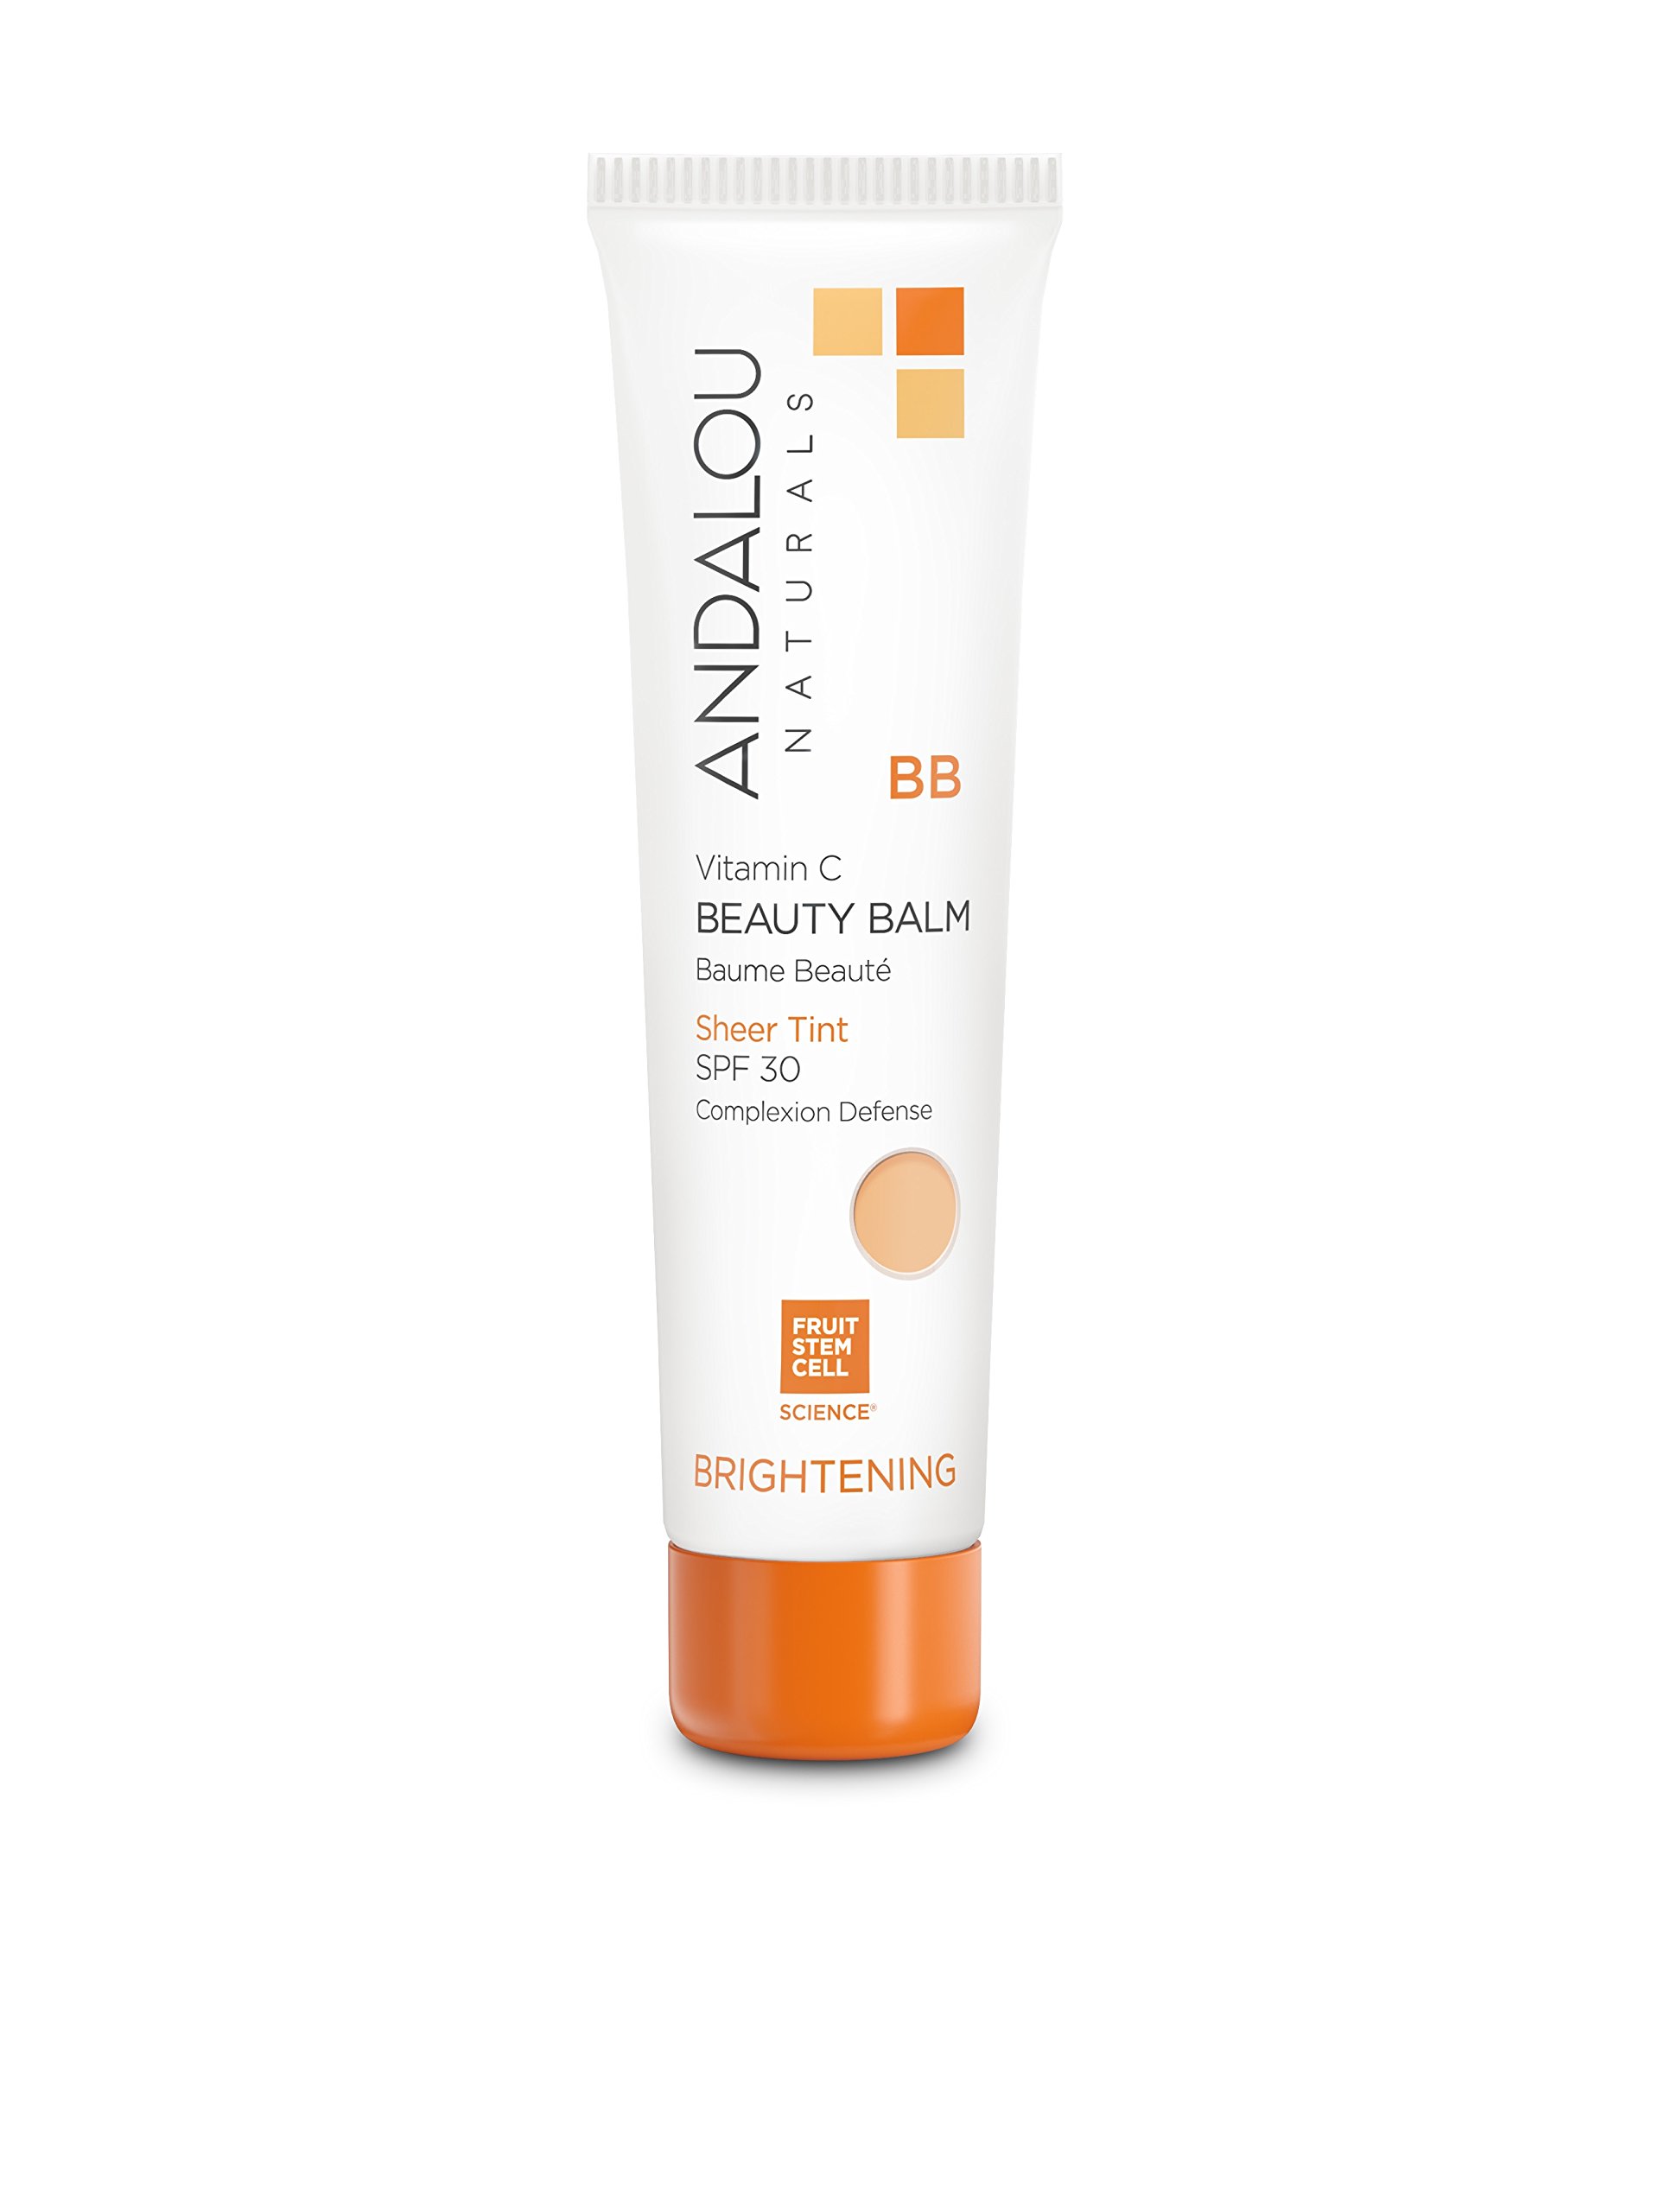 Andalou Naturals Vitamin C BB Beauty Balm Sheer Tint SPF 30, 2-in-1 BB Cream & Face Sunscreen with Broad Spectrum Protection, Mineral Sunscreen with Non-Nano Zinc Oxide, 2 Fl Oz